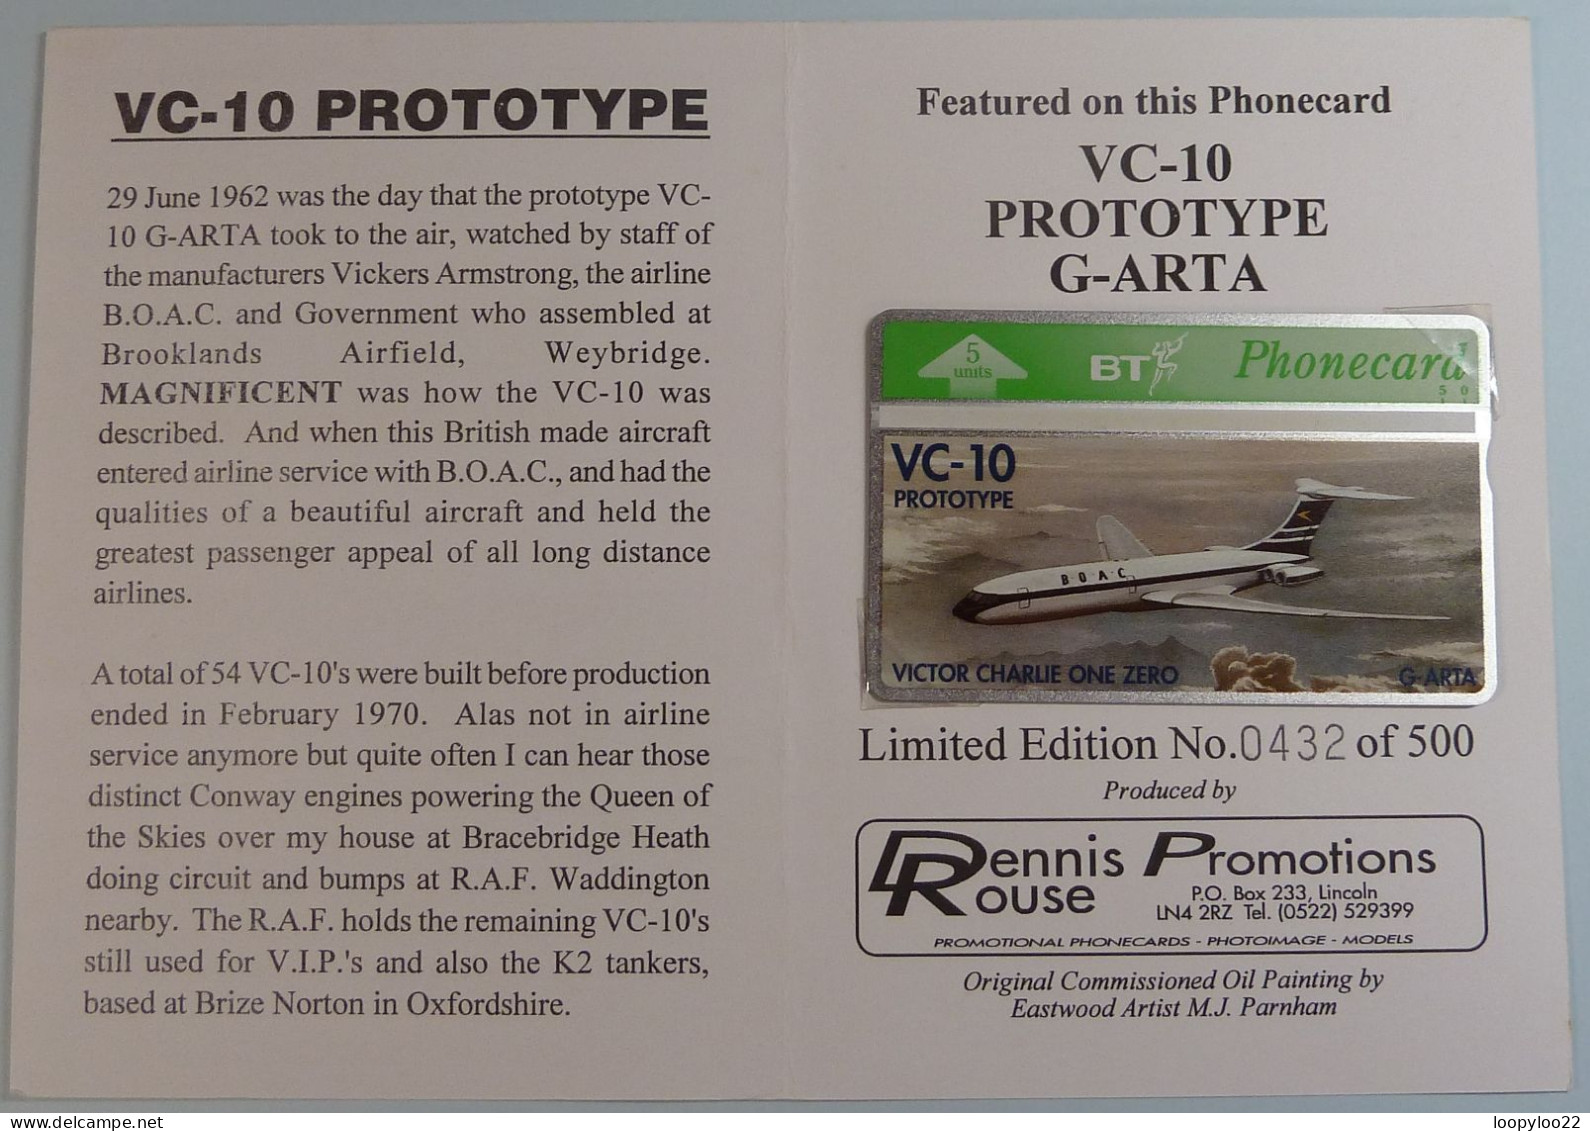 UK - BT - L&G - VC-10 Prototype - Victor Charlie One Zero - Rennie Rouse - Ltd Edition In Folder - 500ex - Mint - BT General Issues